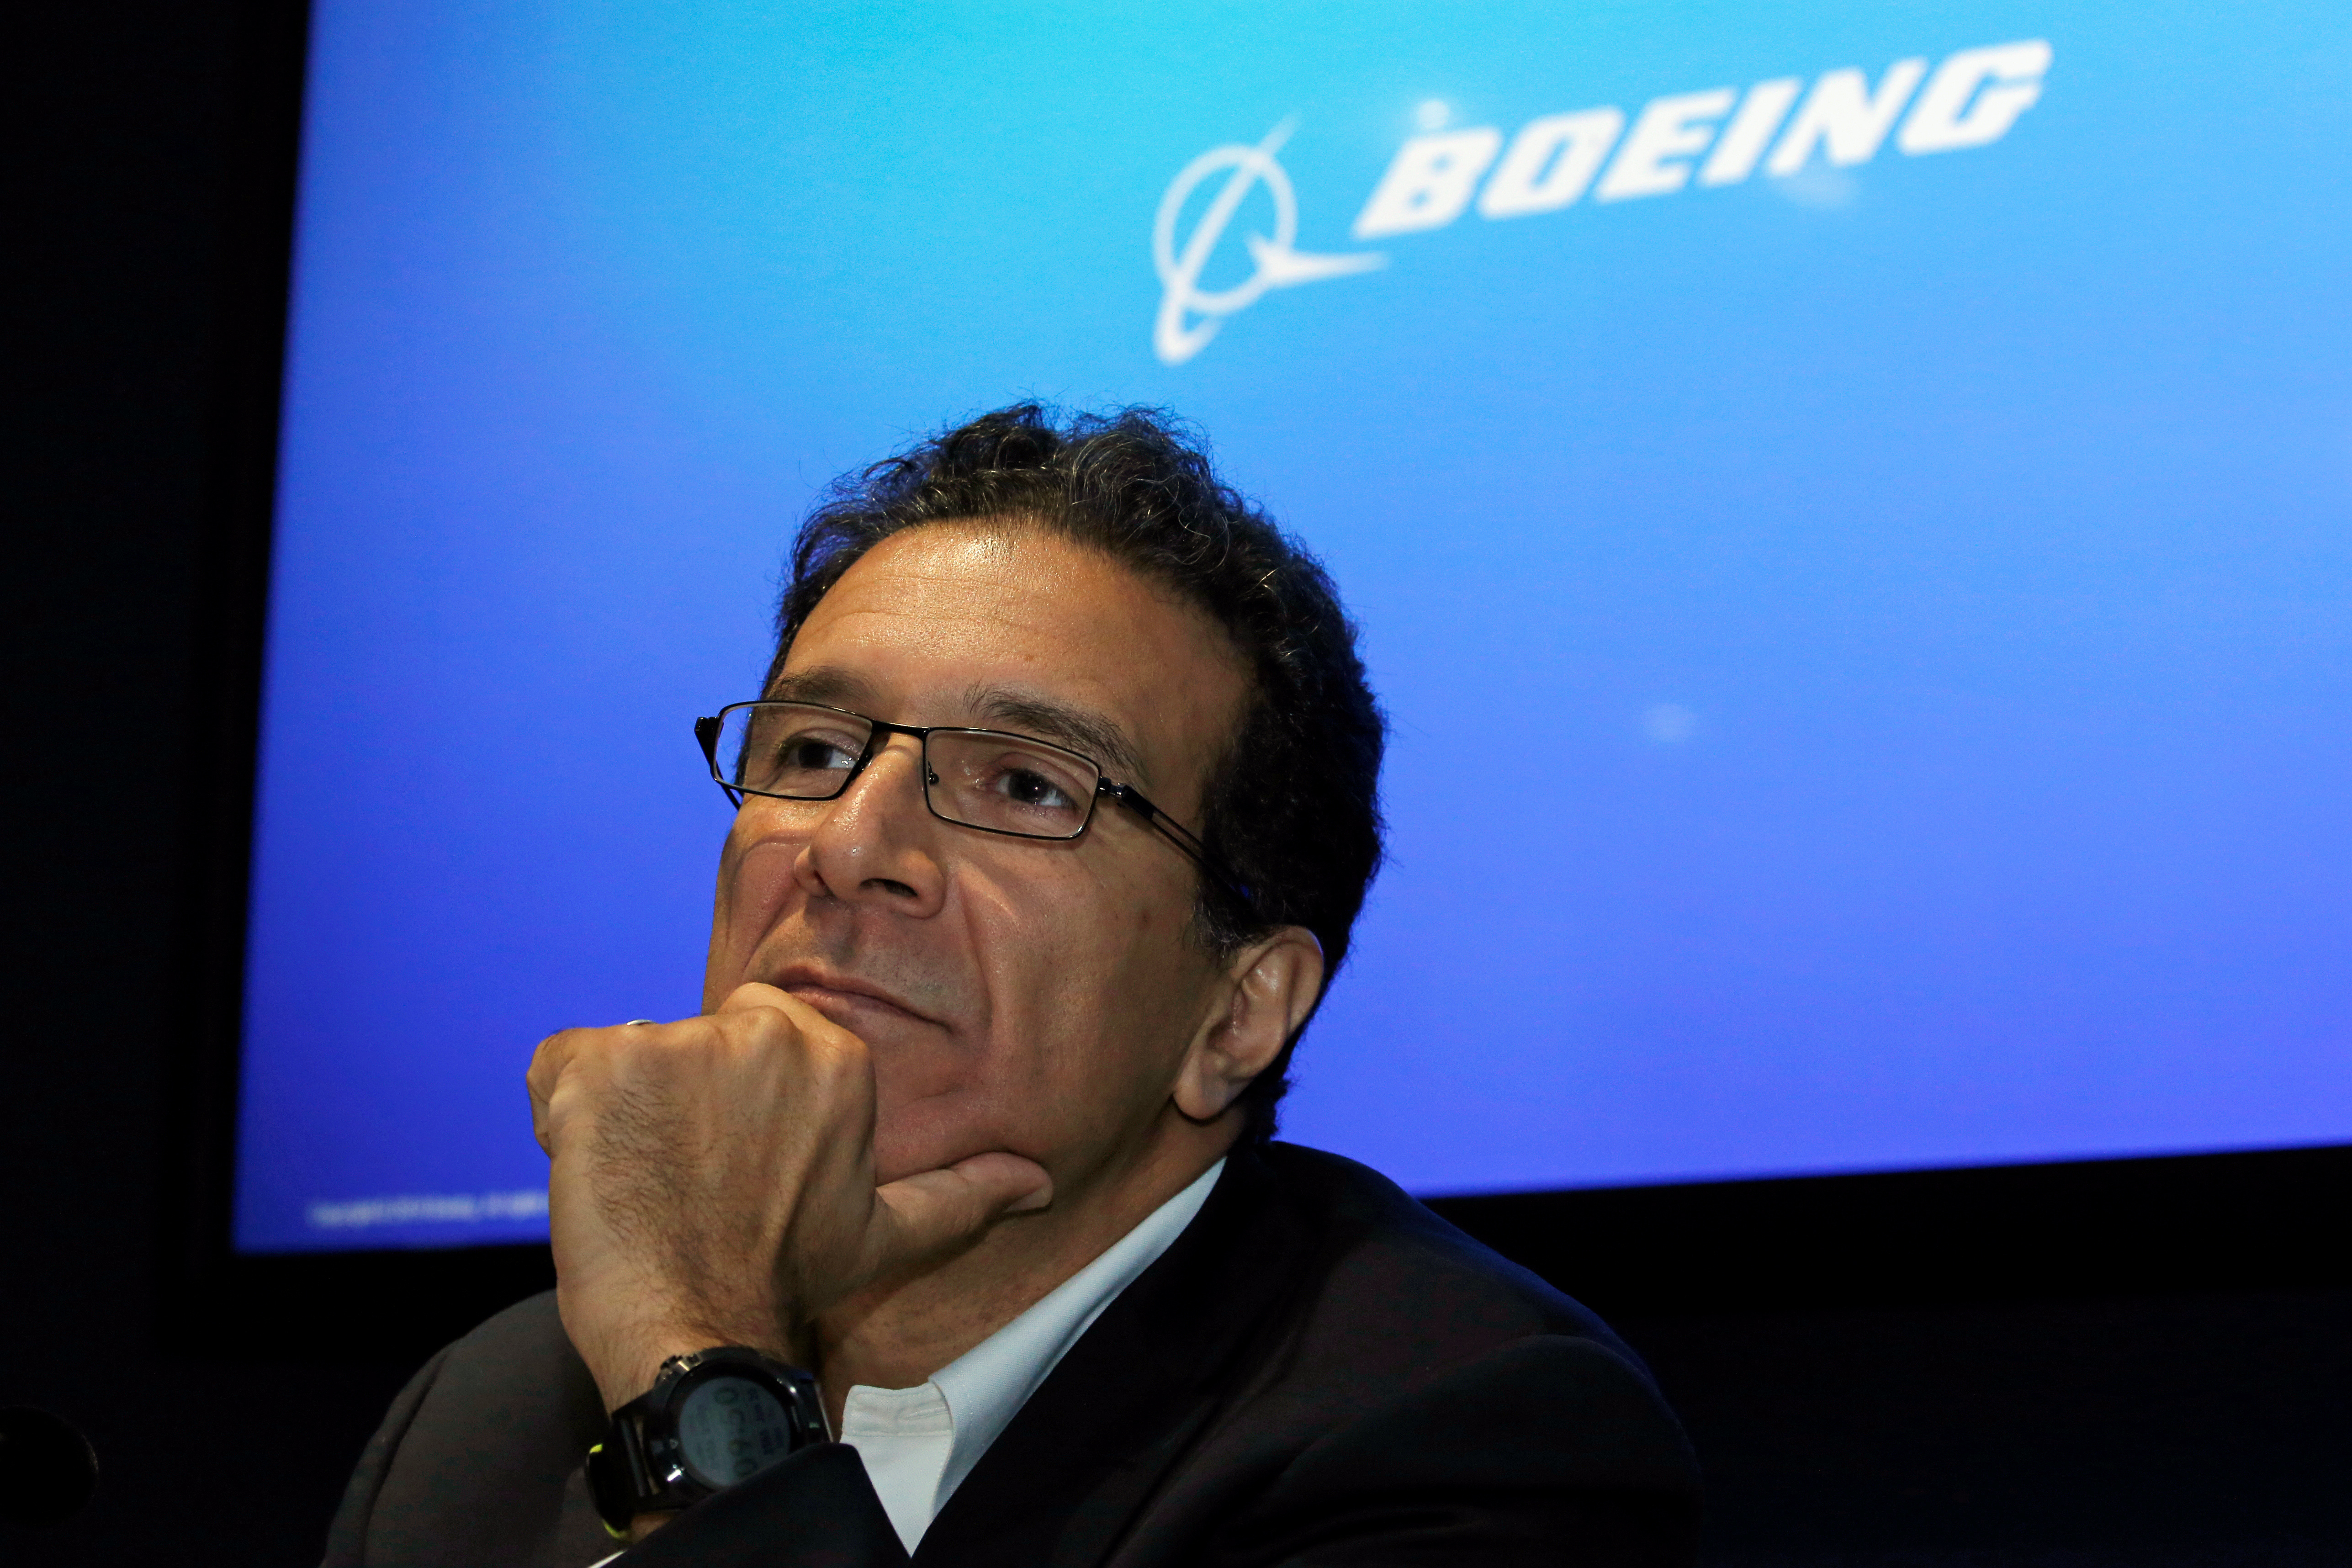 Boeing Commercial Sales and Marketing Vice President Ihssane Mounir attends a news conference at the 53rd International Paris Air Show at Le Bourget Airport near Paris